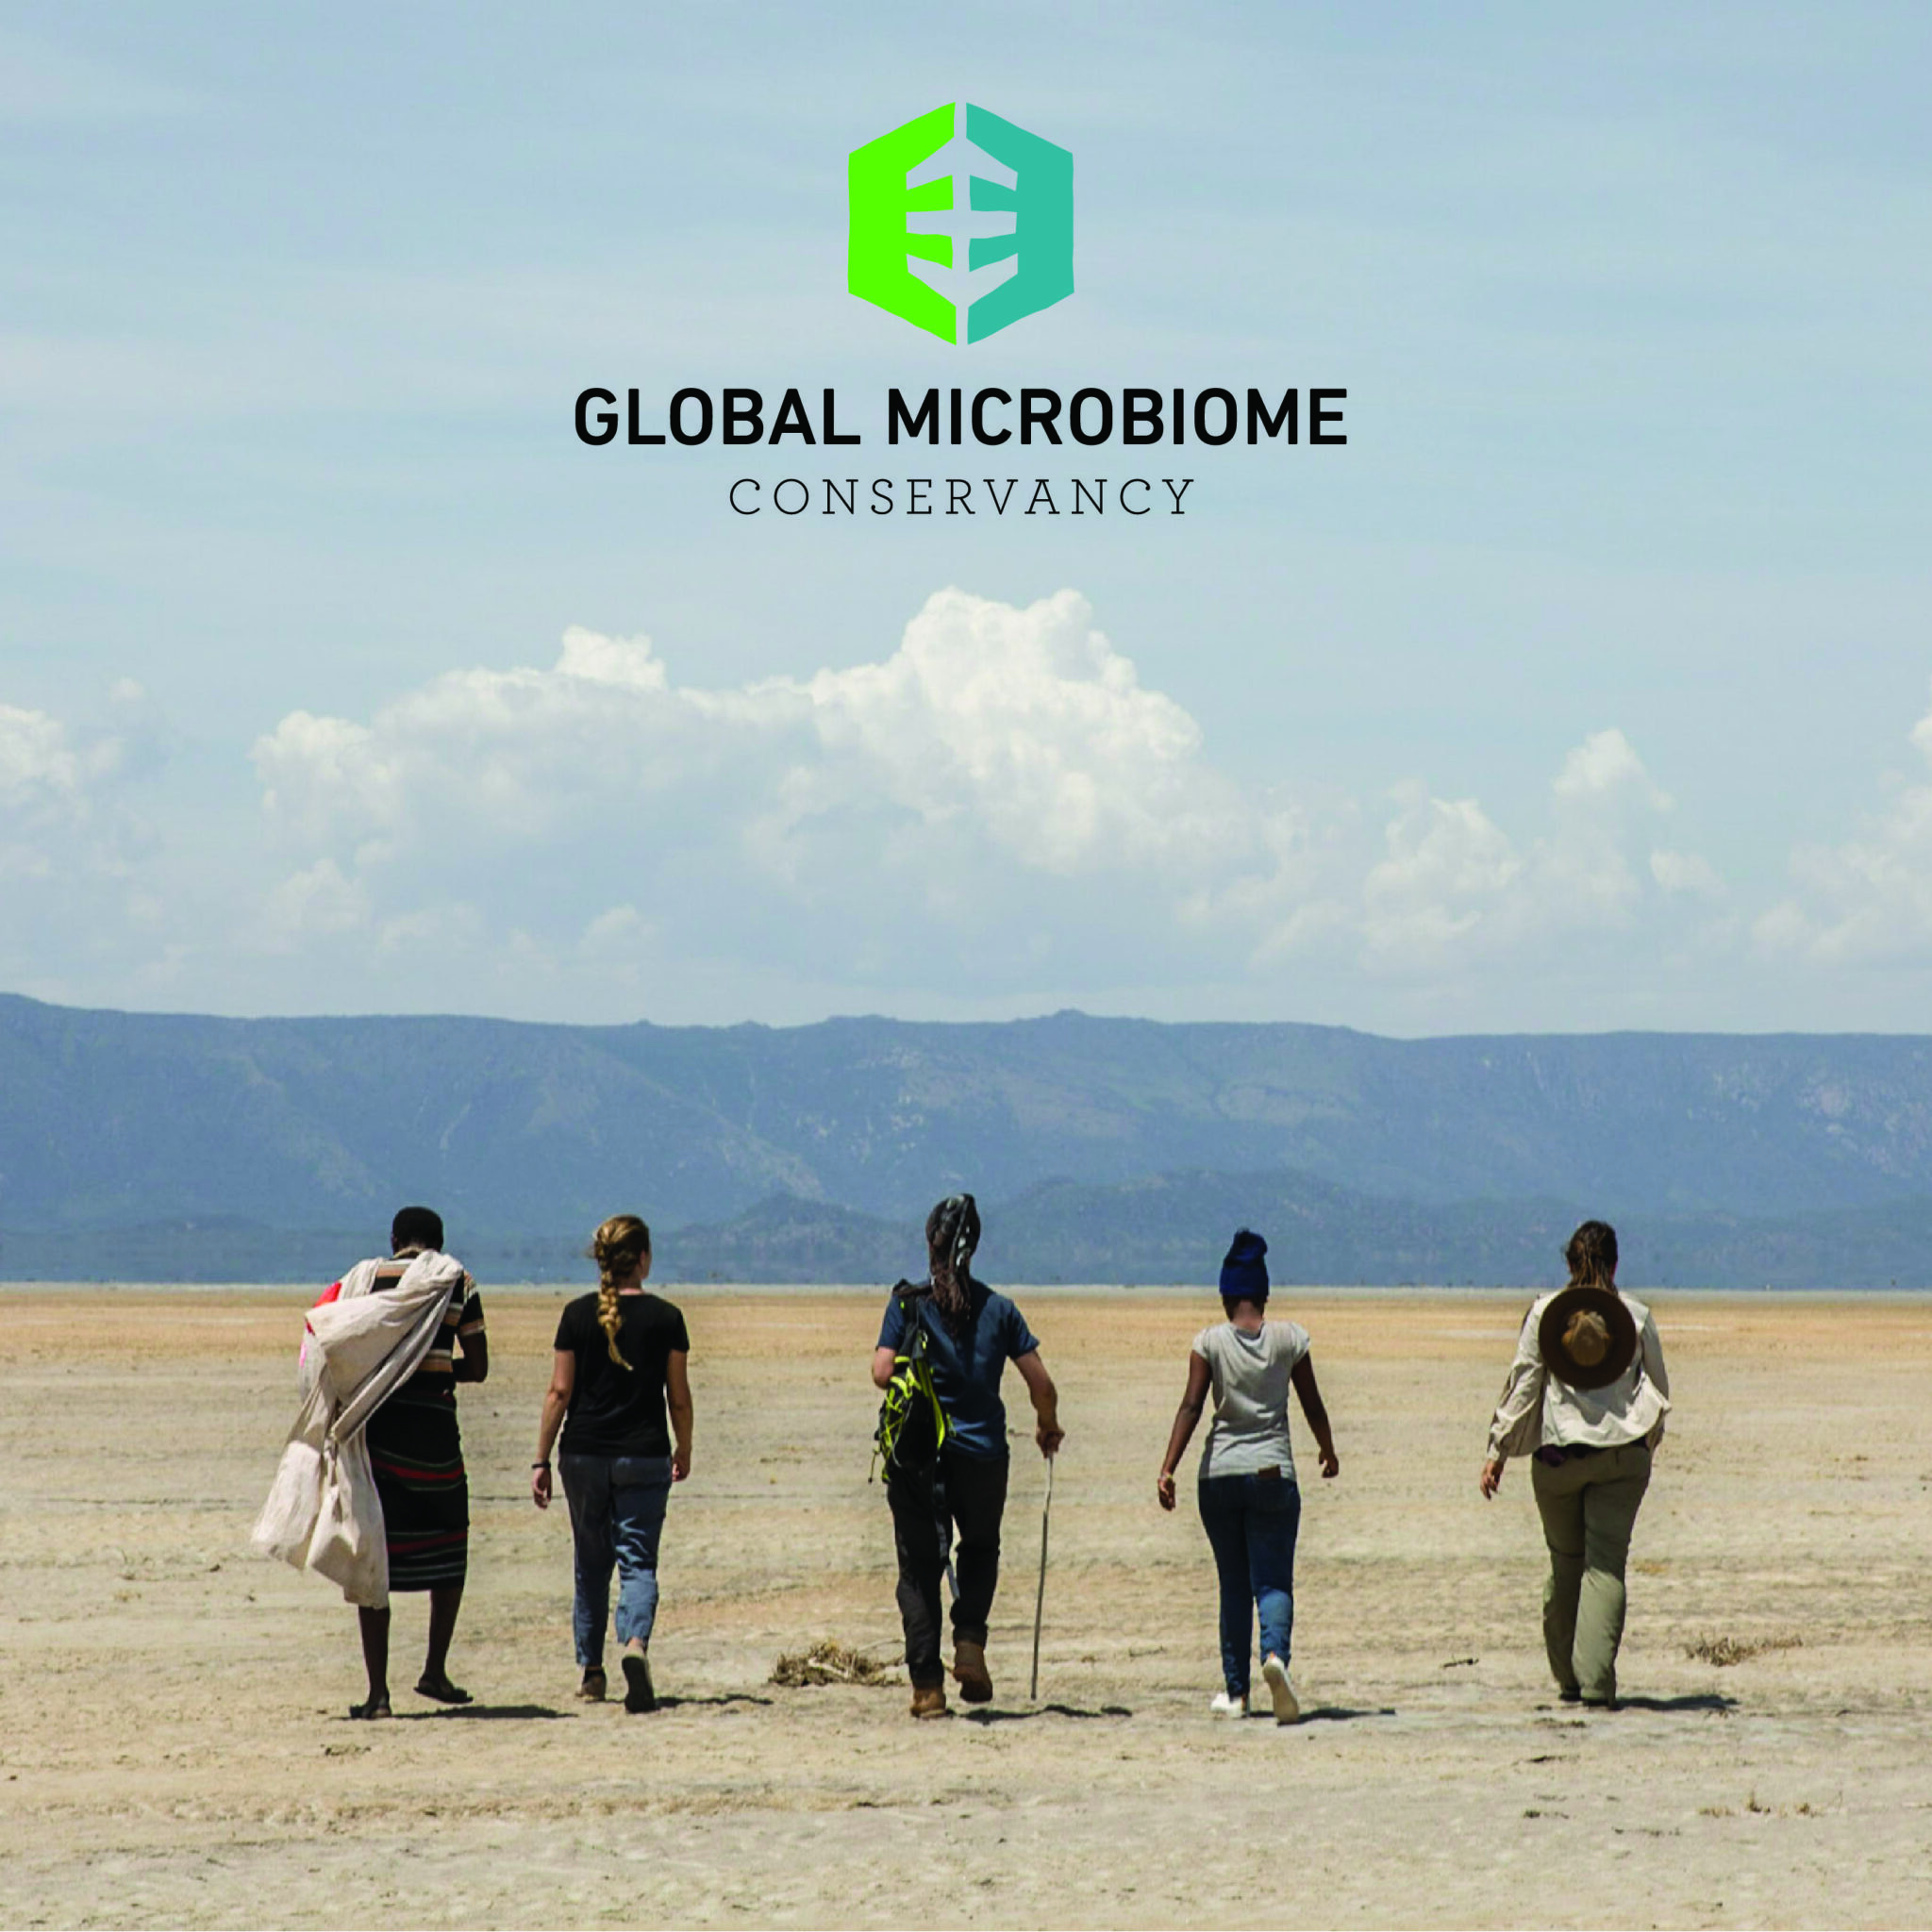 A group of 5 scientists walking through a dried river bed.